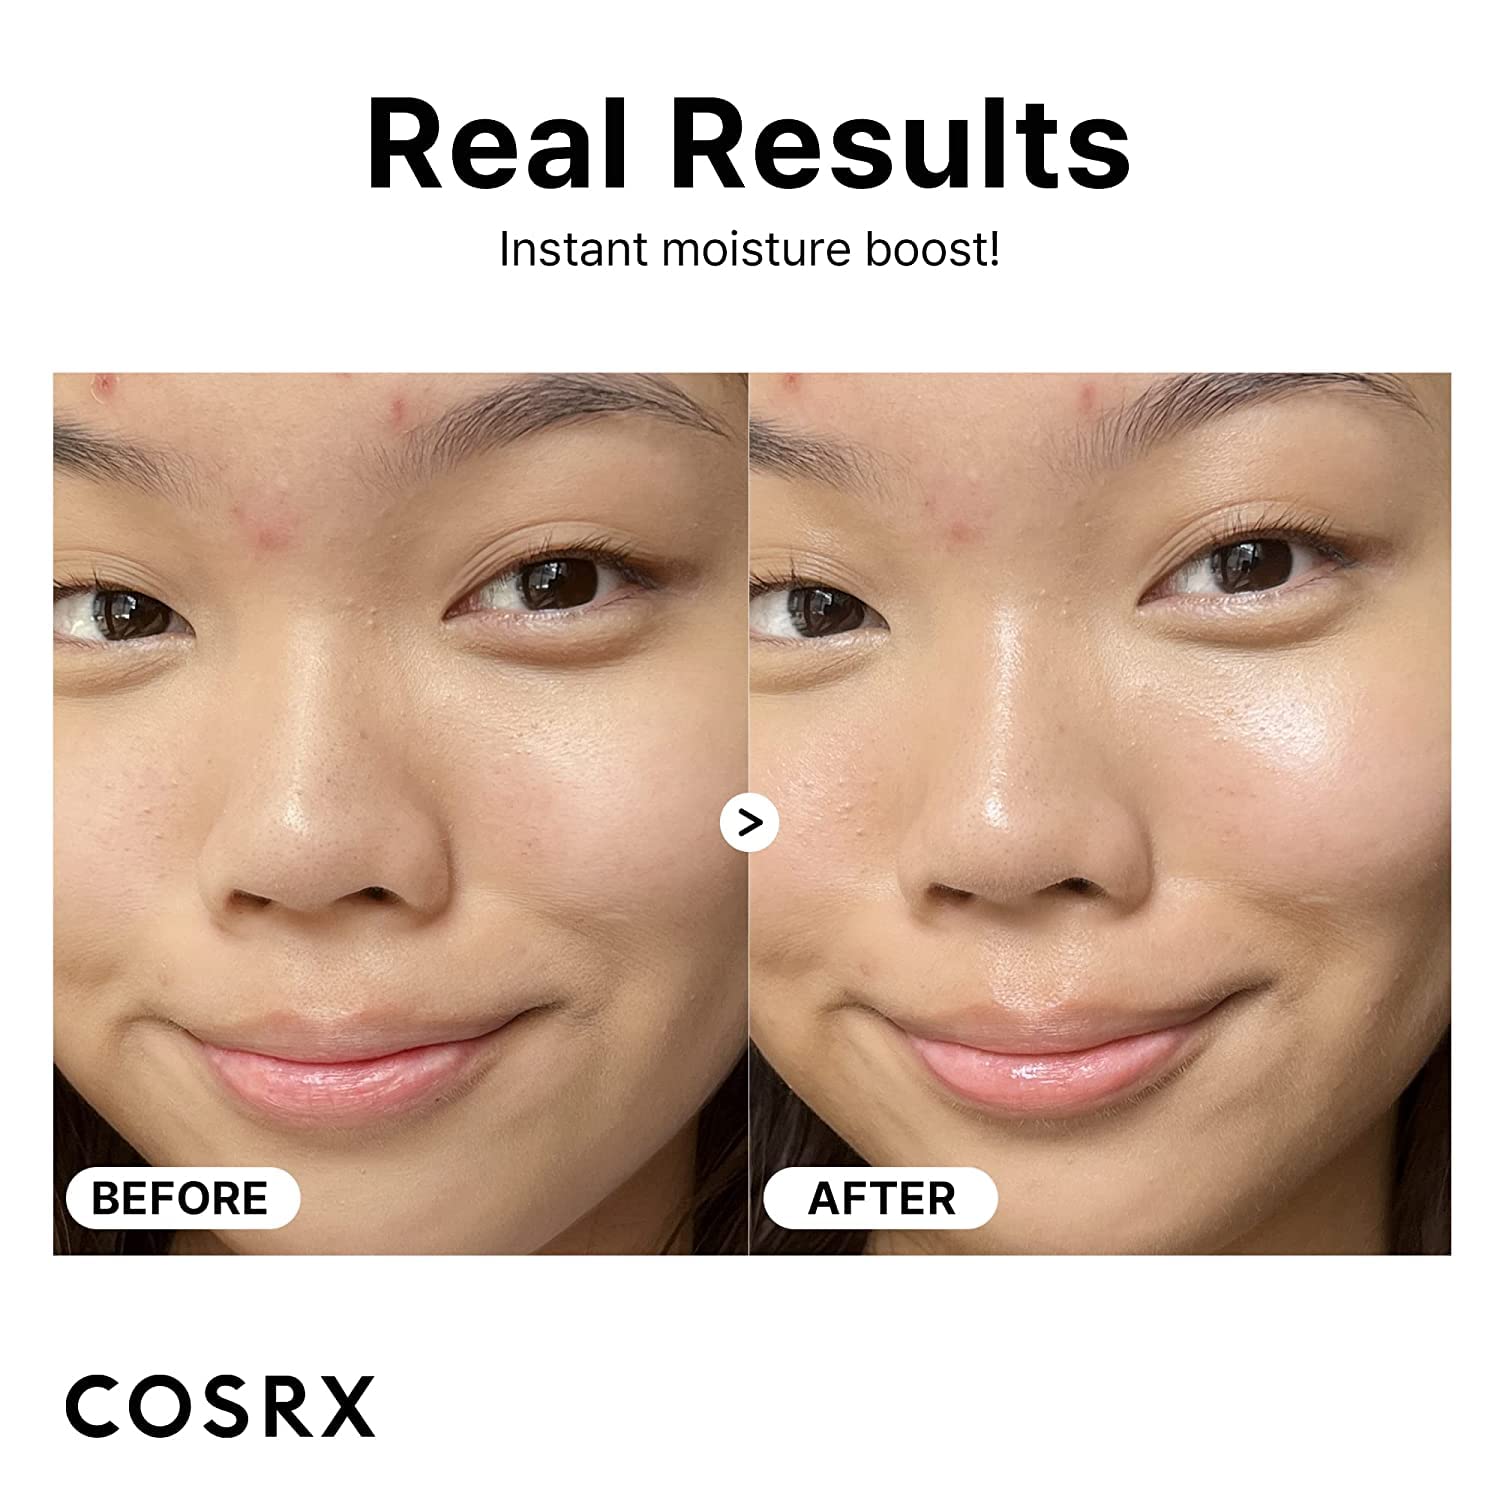 COSRX Hyaluronic Acid Hydrating Duo- Hyaluronic Acid Intensive Cream + Hyaluronic Acid 3% Serum, Deep Hydration, Retain Moisture, Easy and Daily Skincare, Korean SKincare